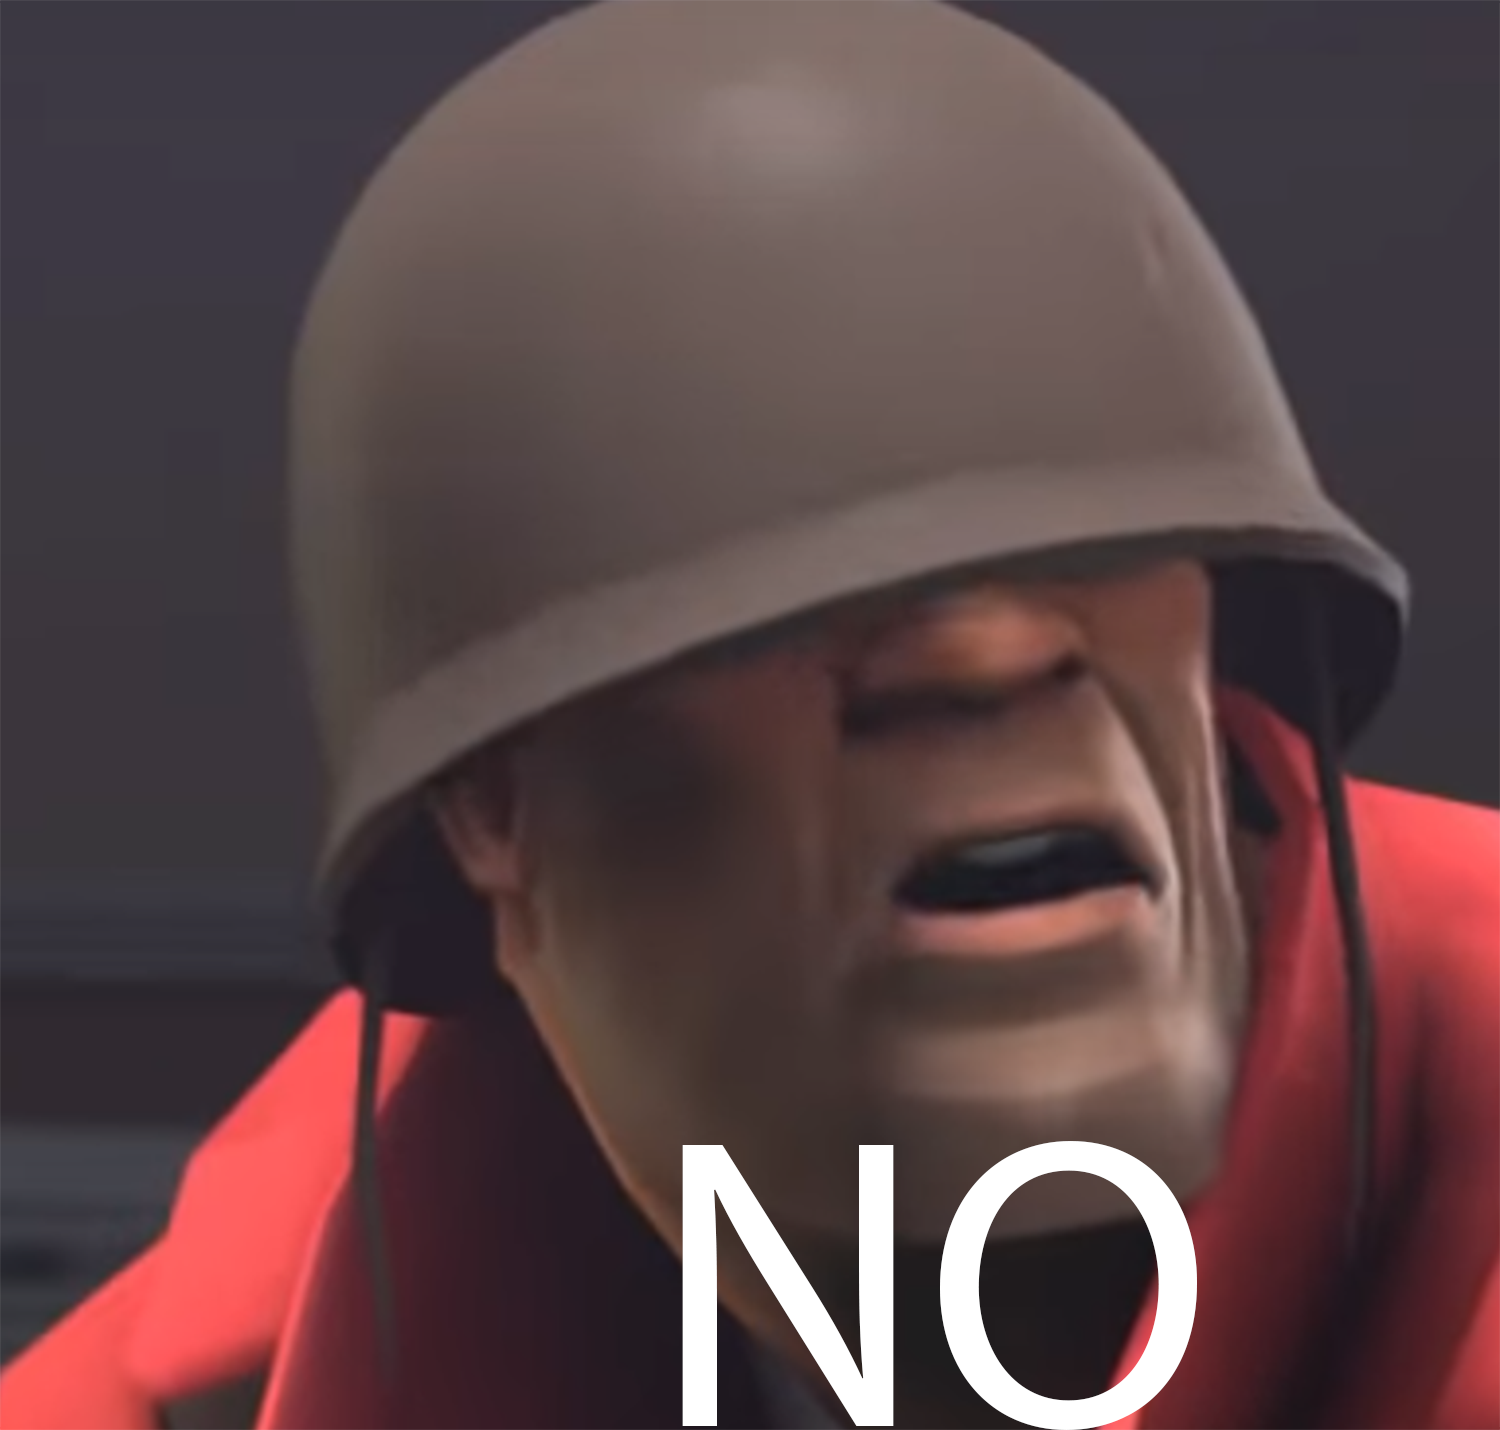 High Quality Soldier no Blank Meme Template